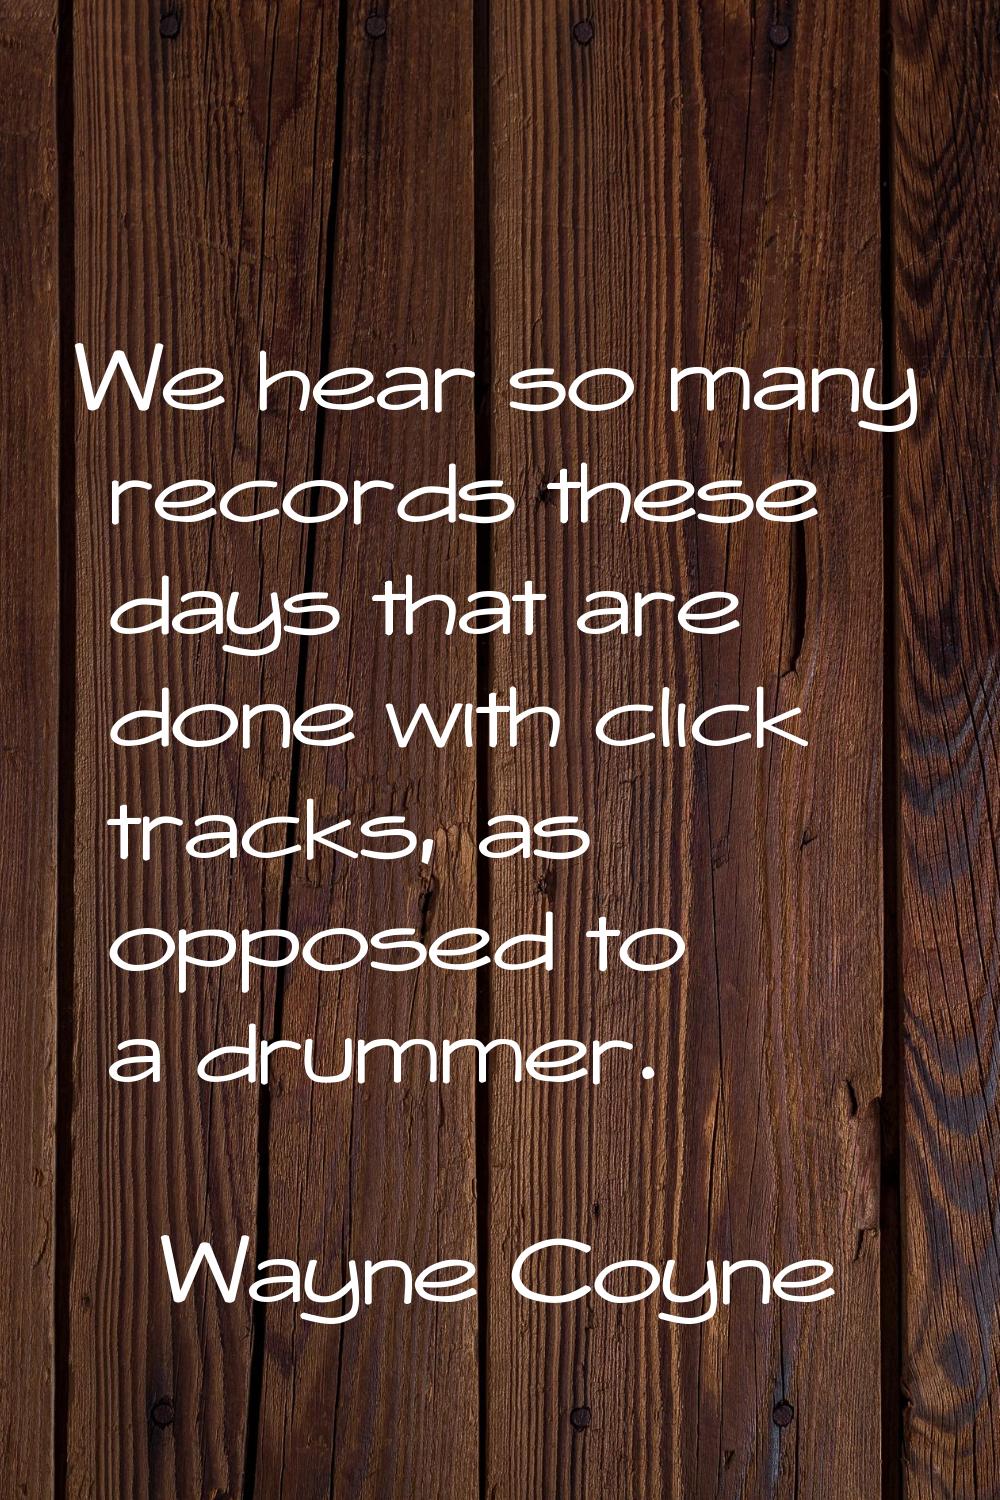 We hear so many records these days that are done with click tracks, as opposed to a drummer.